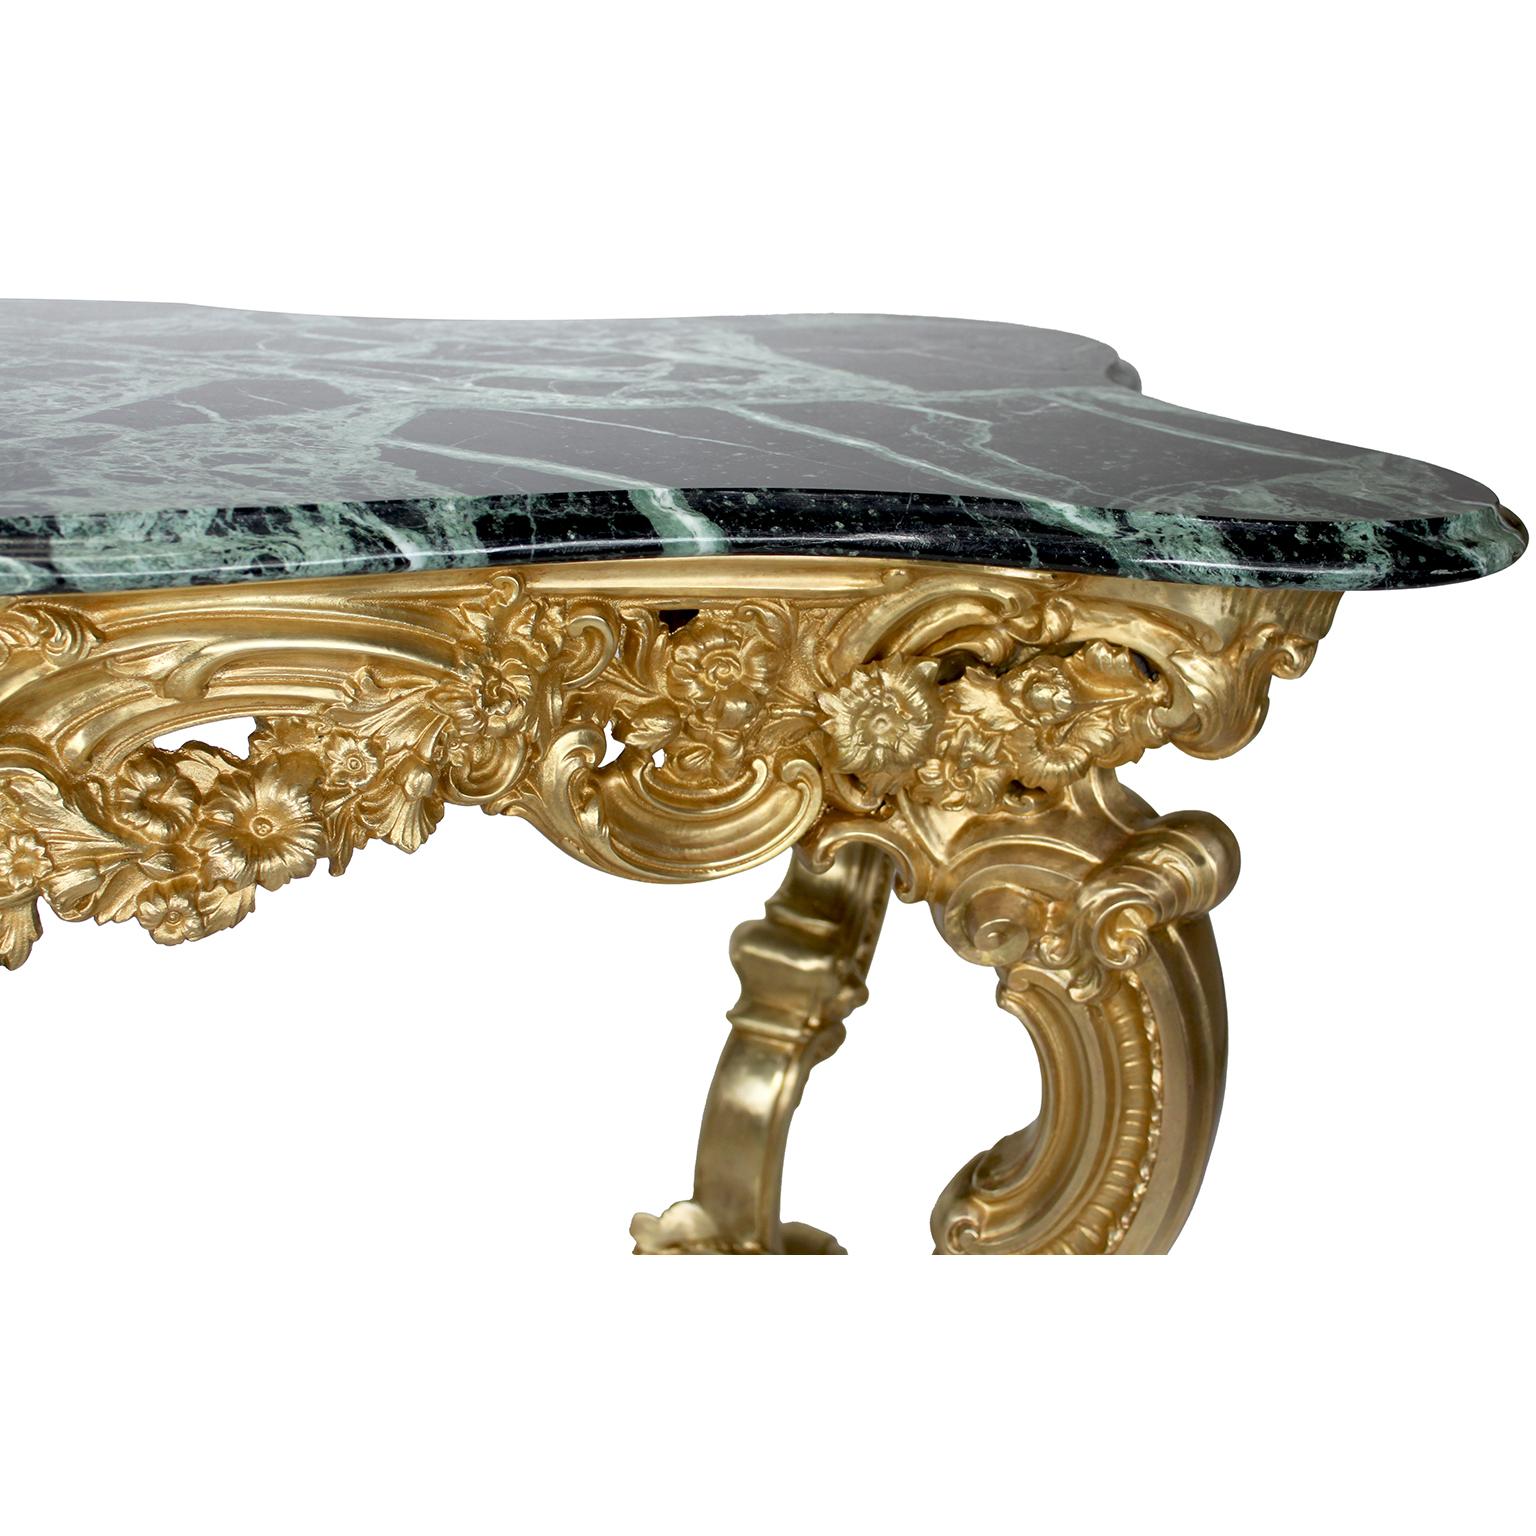 Pair Italian Early 20th Century Rococo-Style Gilt-Bronze Center Tables/Consoles  For Sale 4